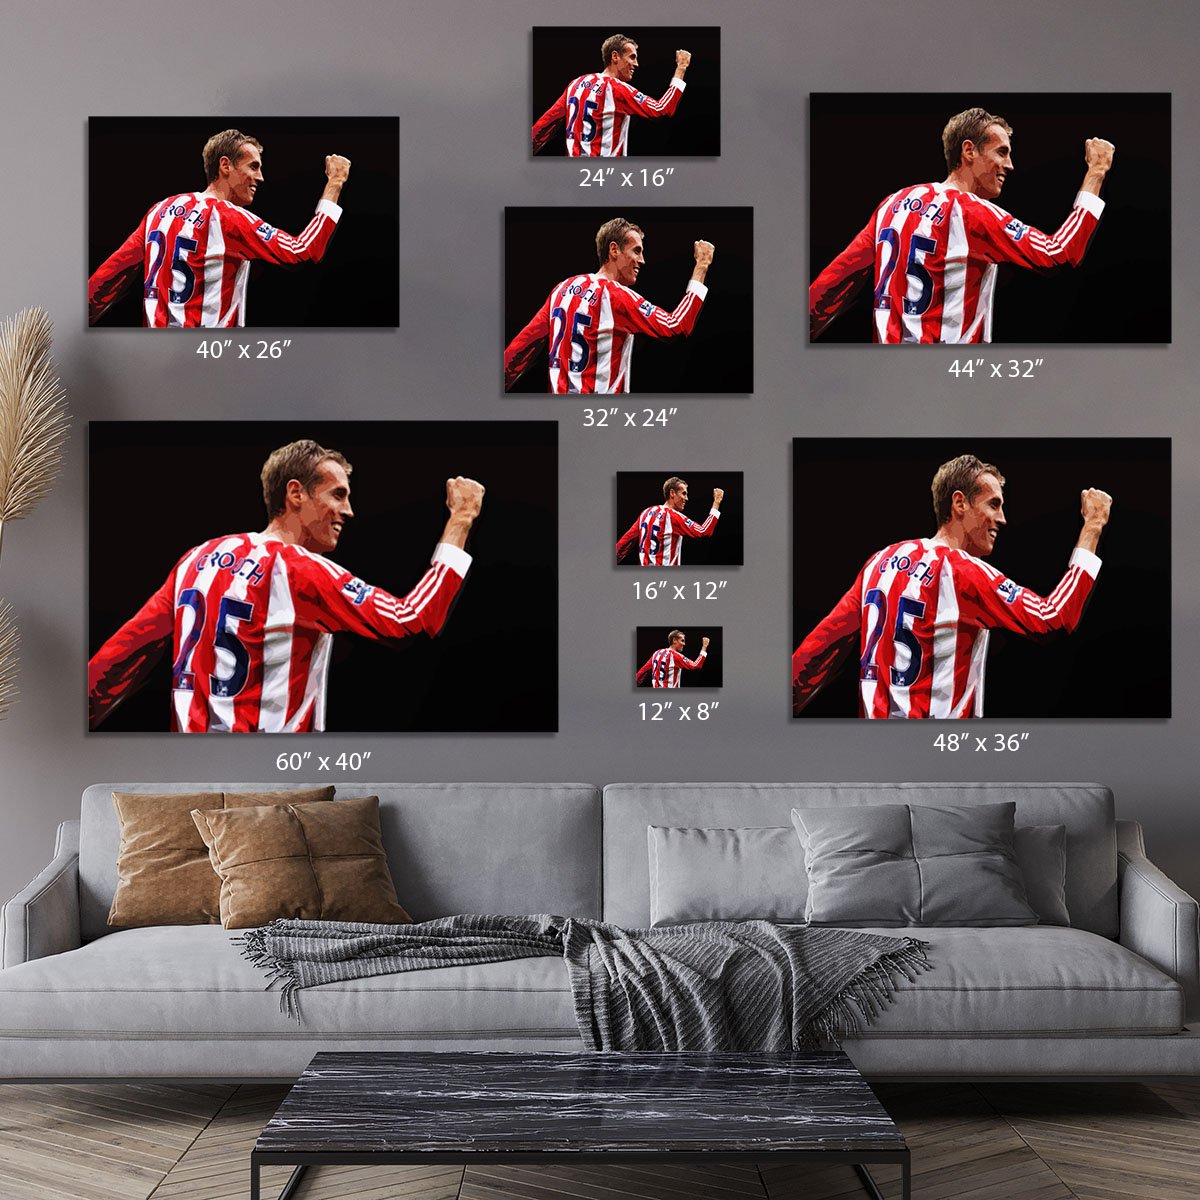 Peter Crouch Stoke City Canvas Print or Poster